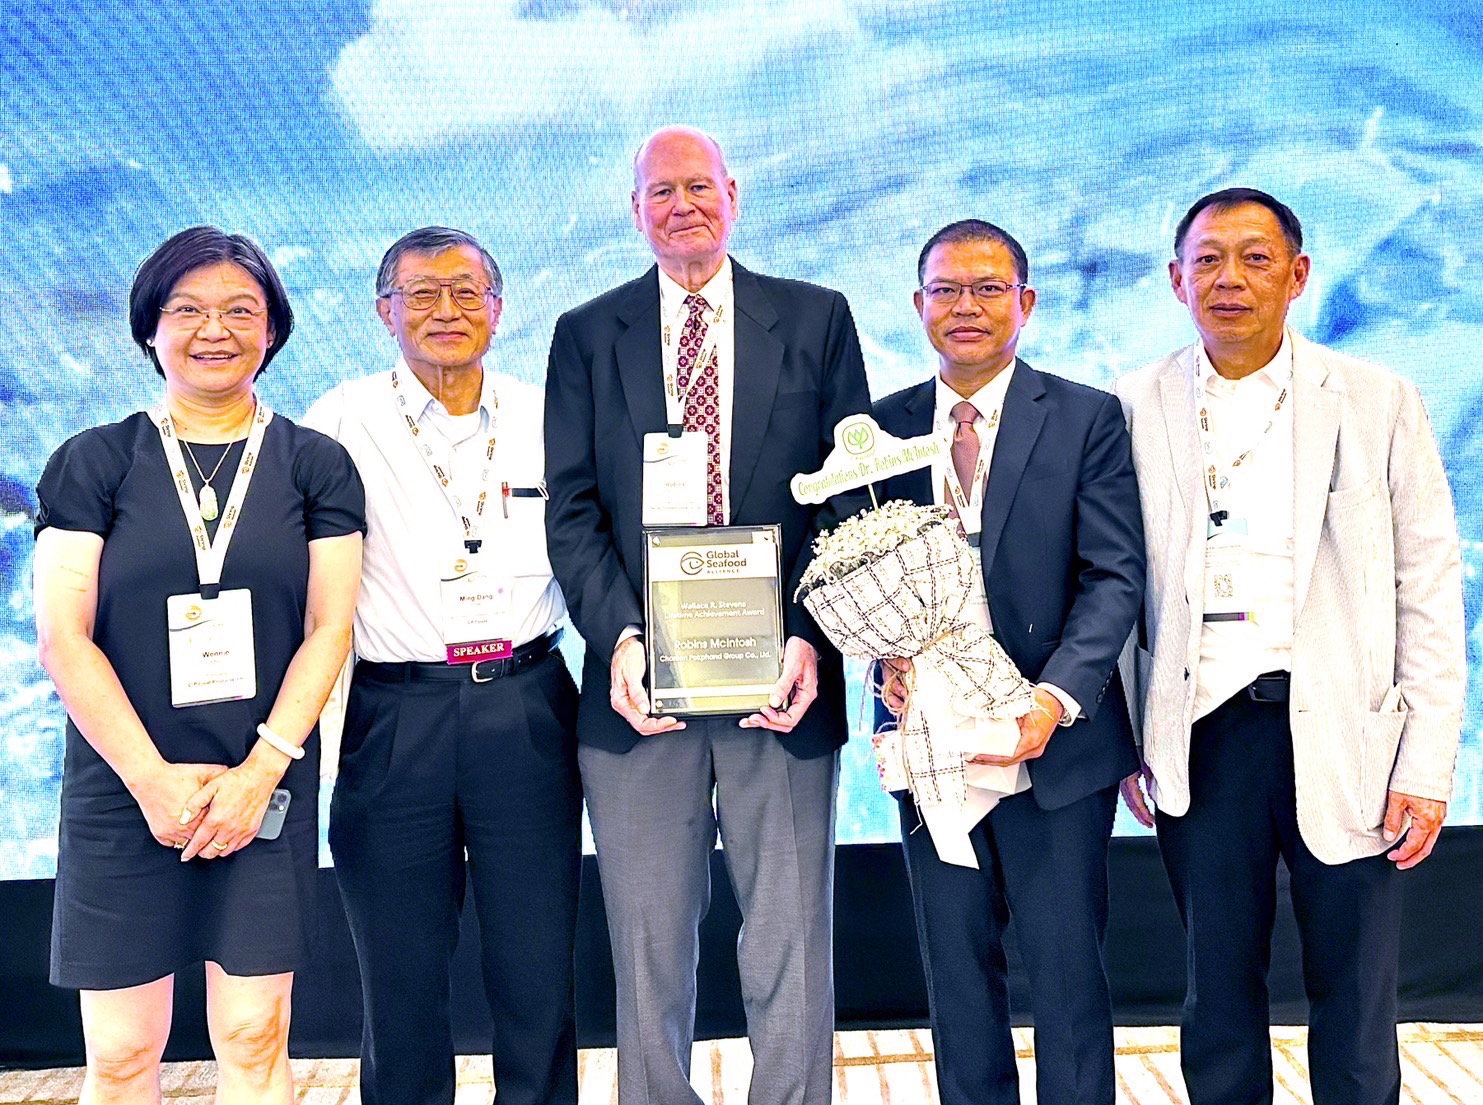 CP Foods' aquaculture expert is recognized for revolutionizing the global sustainable shrimp sector